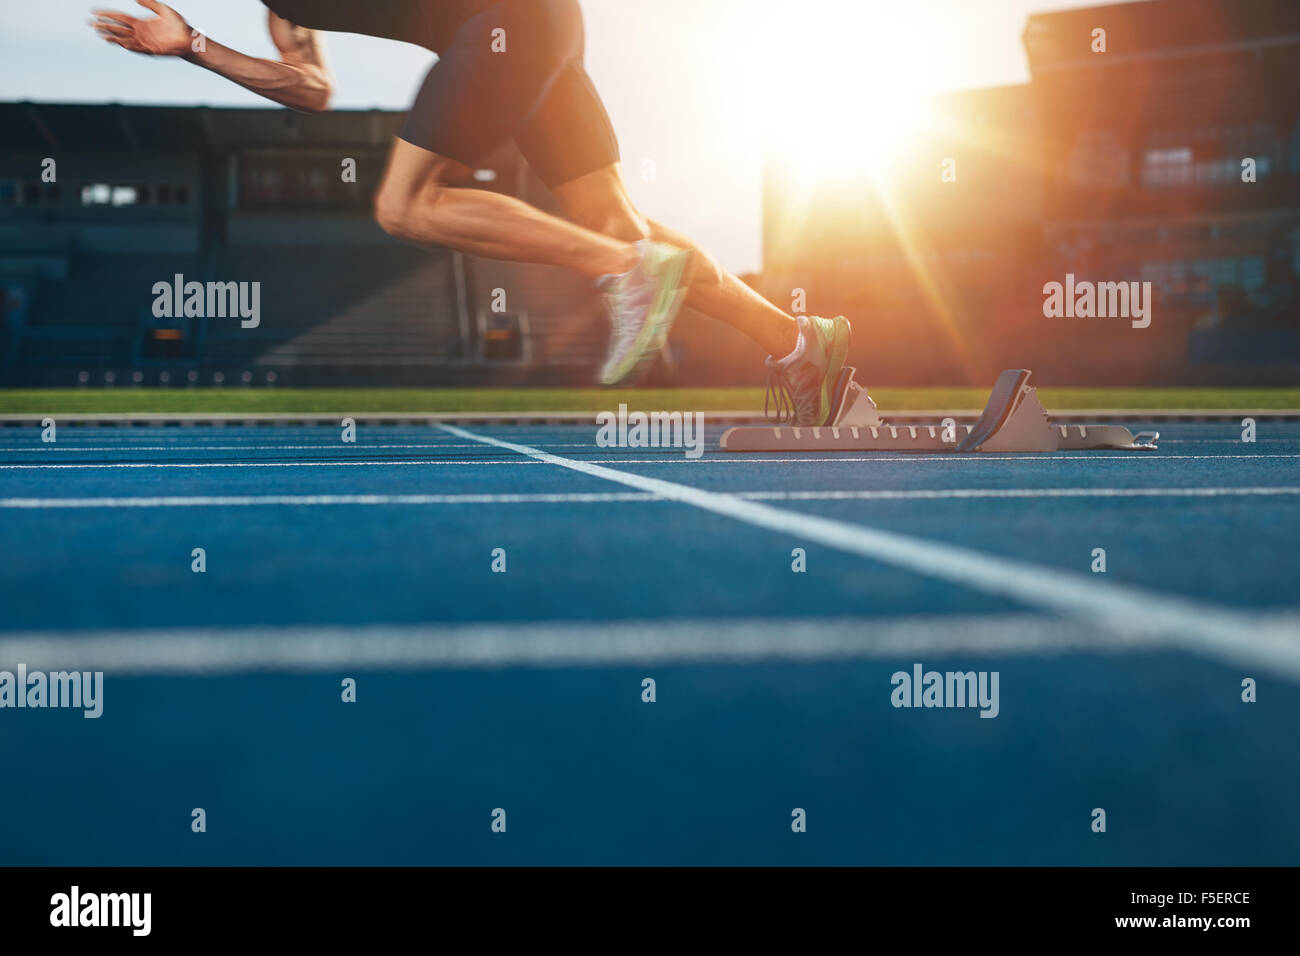 Athlete running on athletic racetrack. Low section shot of male runner starting the sprint from the starting line with bright su Stock Photo